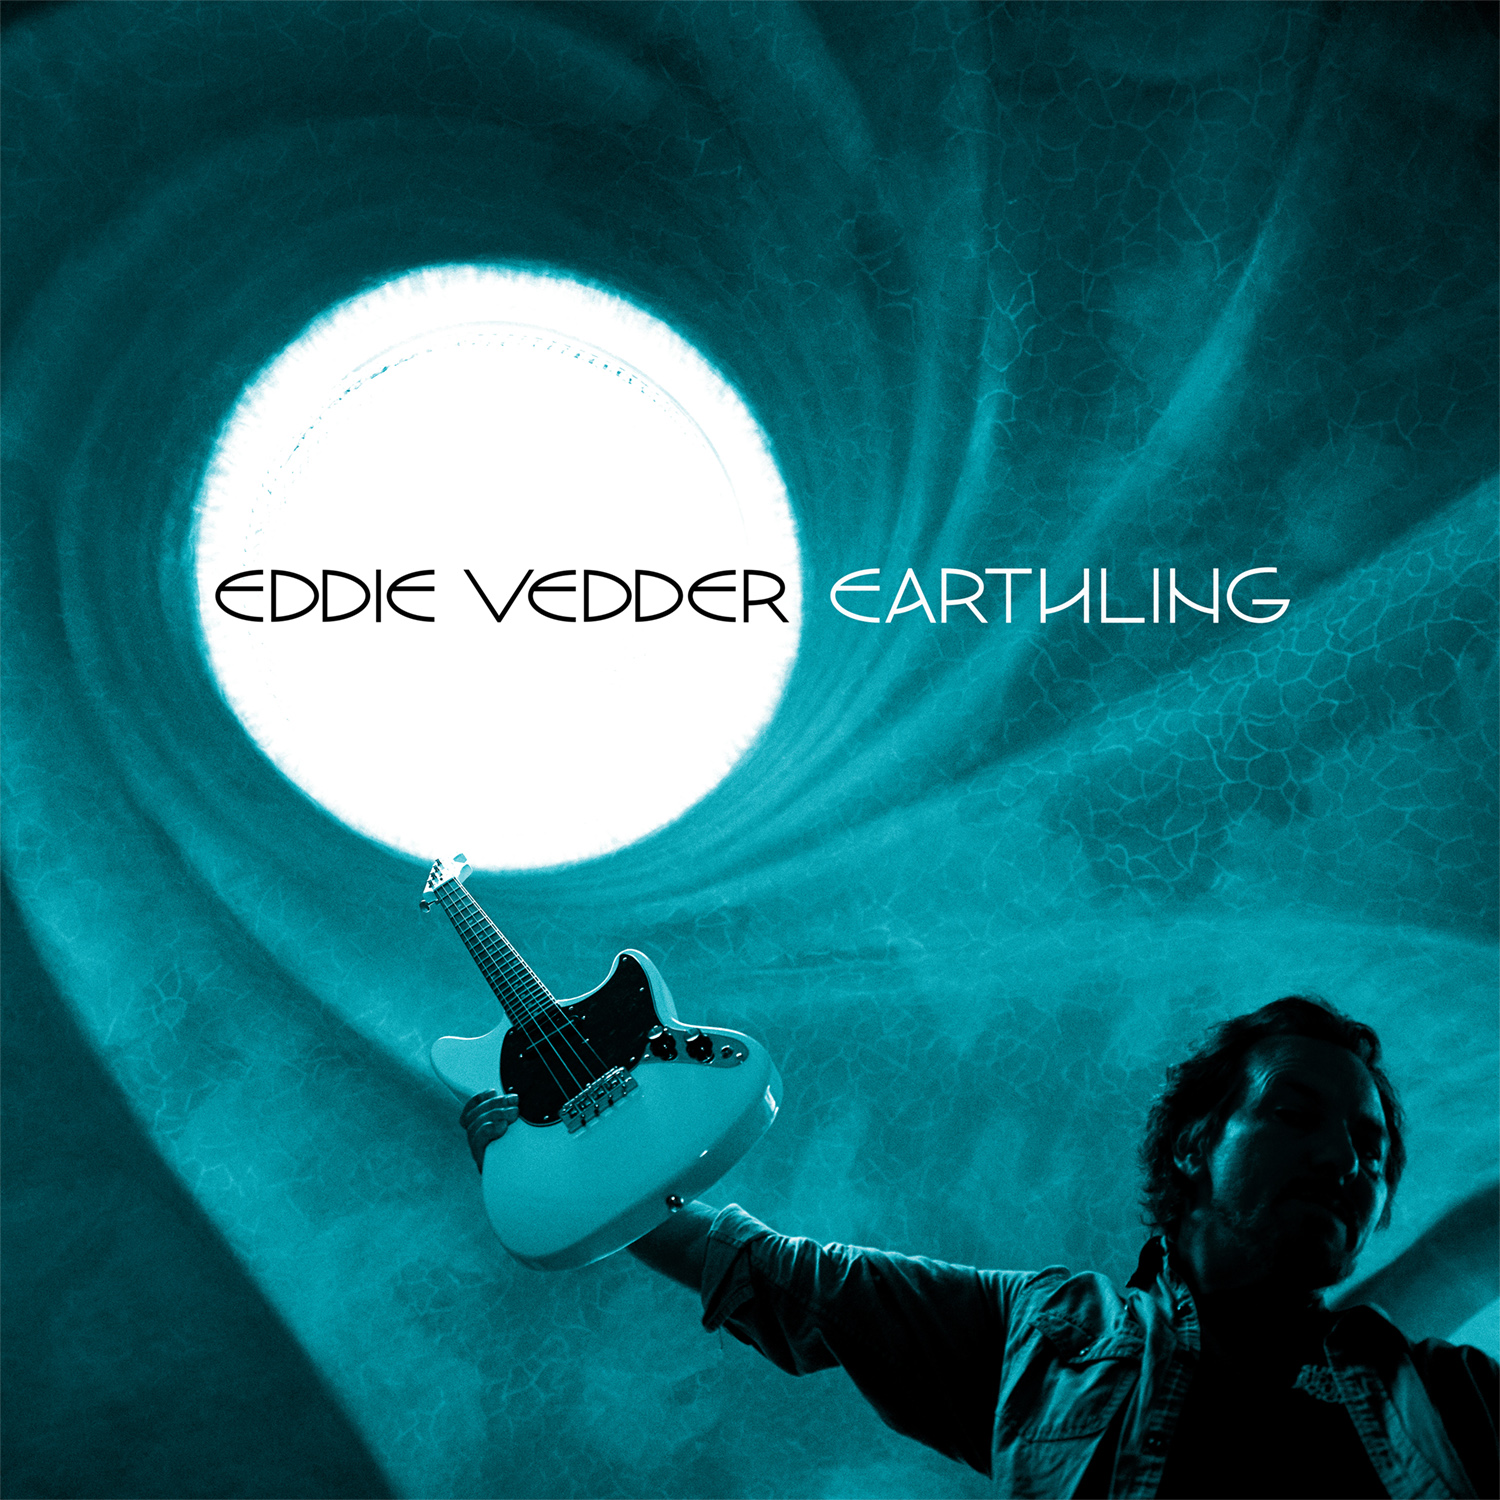 Eddie Vedder Announces New Album ’Earthling’ Preorder and Shares New Single “The Haves”